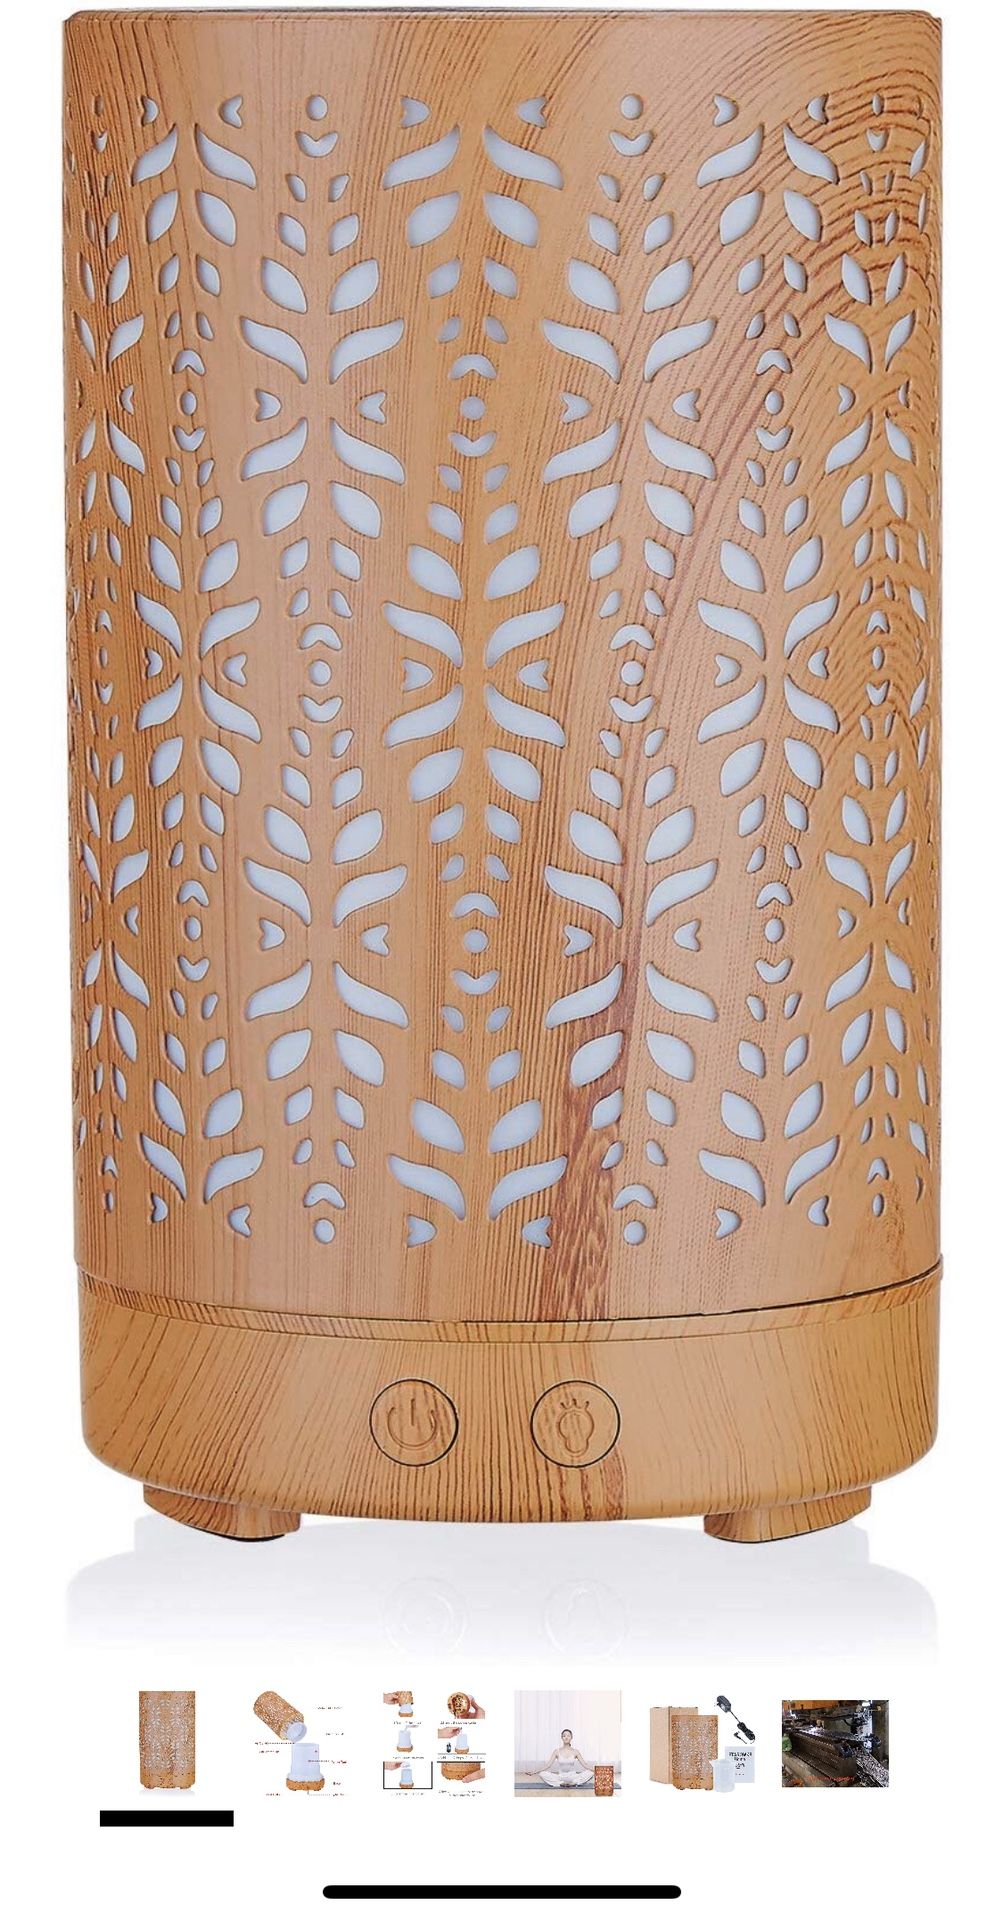 Wood Grain Aromatherapy Essential Oil Diffuser,Humidifier,